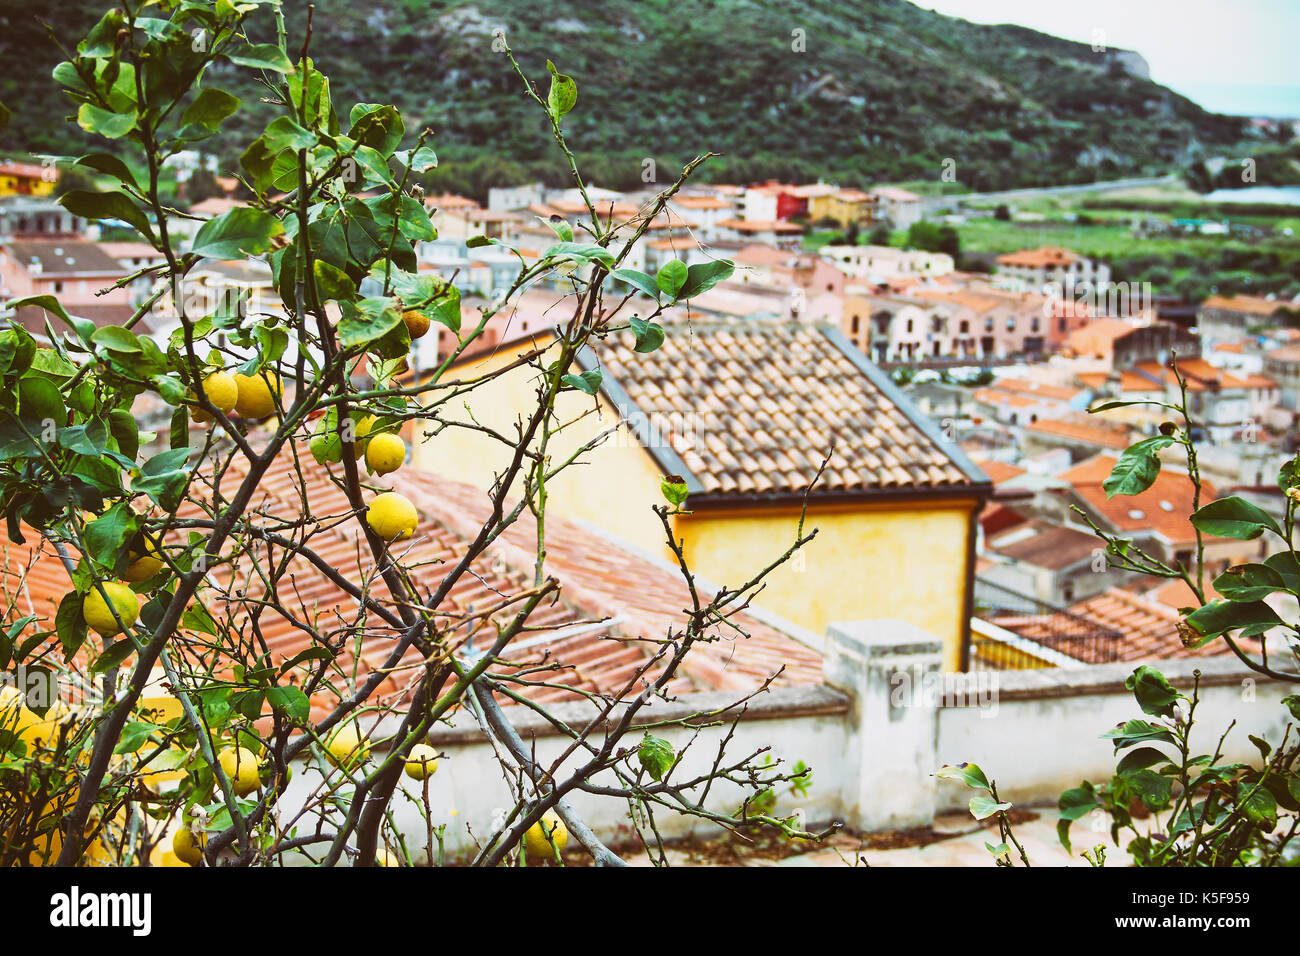 Lemon tree and roofs of medieval town of Bosa, Sardinia, Italy Stock Photo